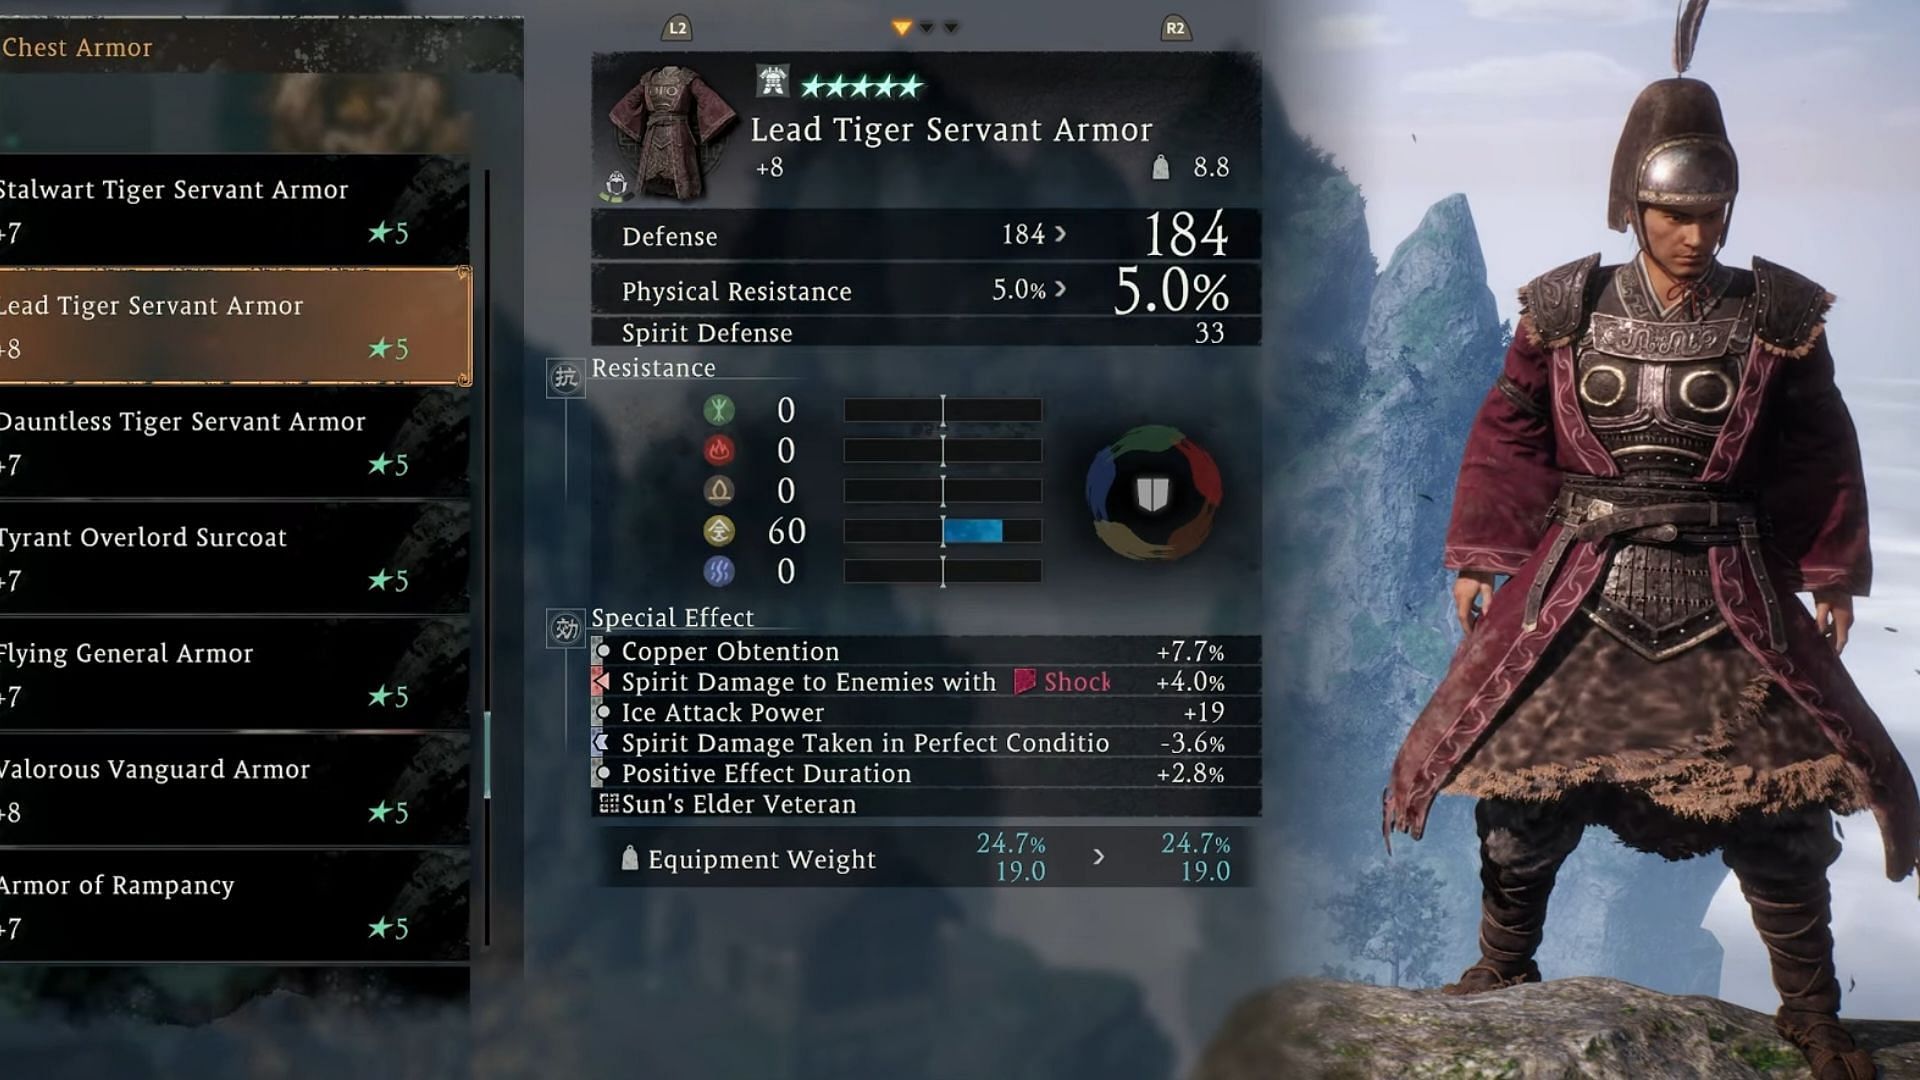 This armor set comes with an Iron Pole Piked Spear (Image via Koei Tecmo)